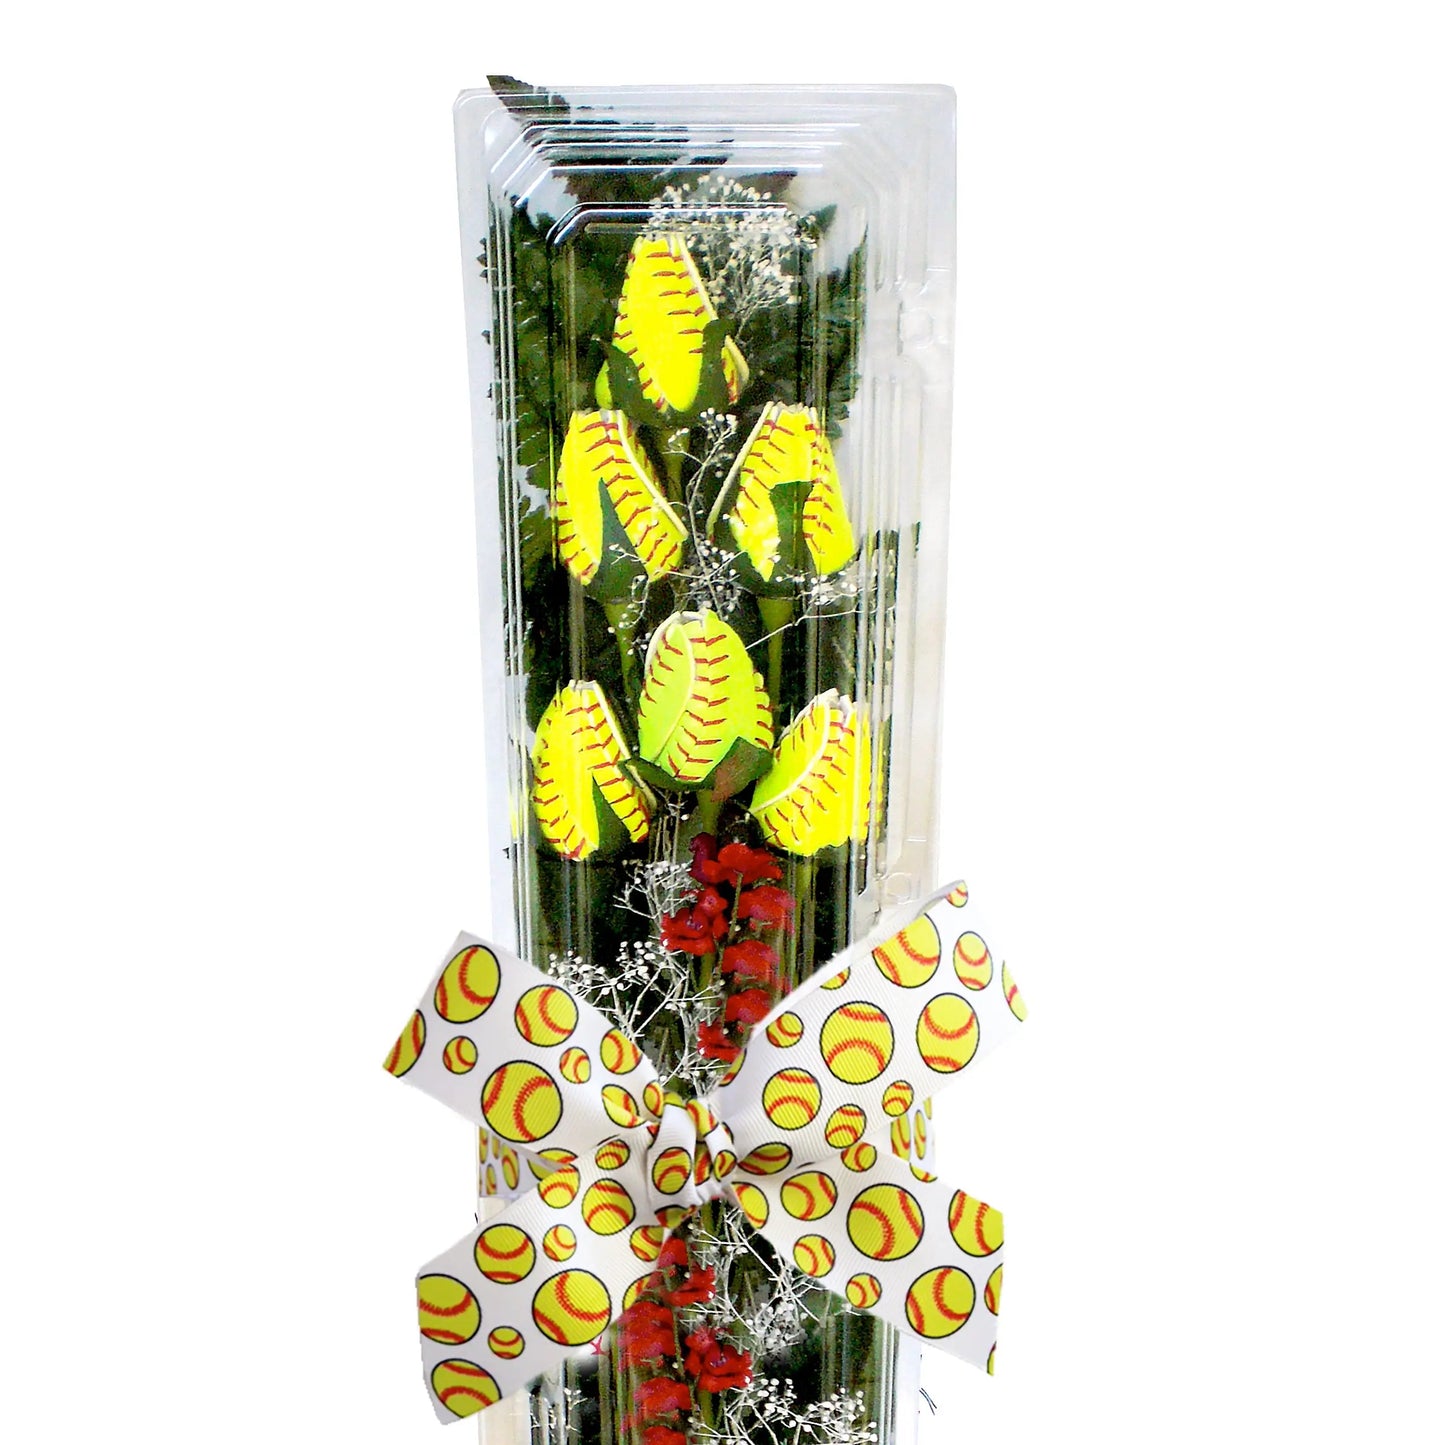 Yyeselk Sport Rose Sport Roses Softball Senior Gifts Bouquet Decorations  Yellow Artificial Flowers（Basketball, Volleyball, Baseball, Football, Rugby  ） 